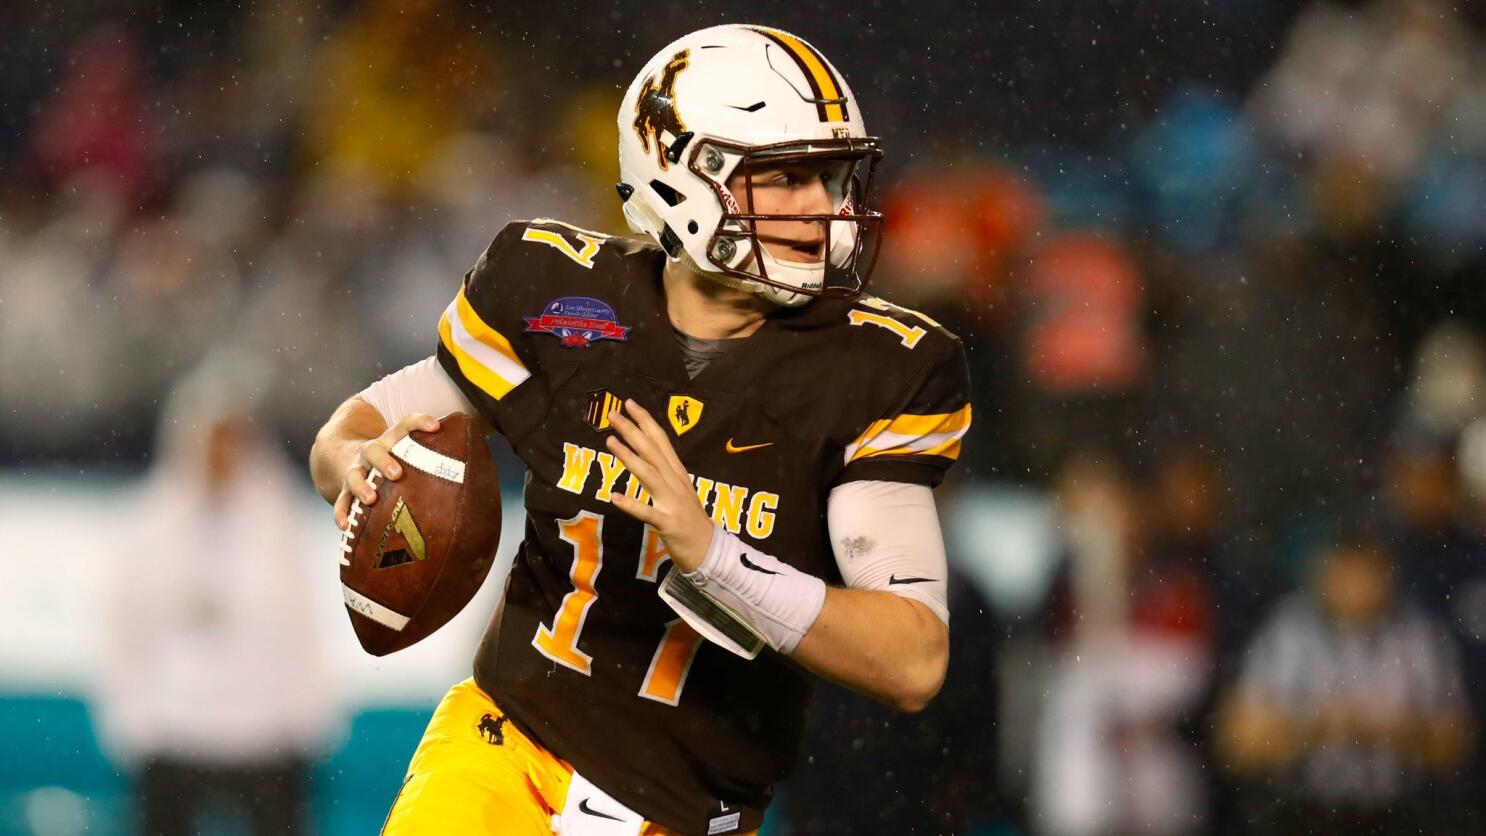 NFL Draft 2018: 'Scared for Josh Allen' if he winds up with Giants